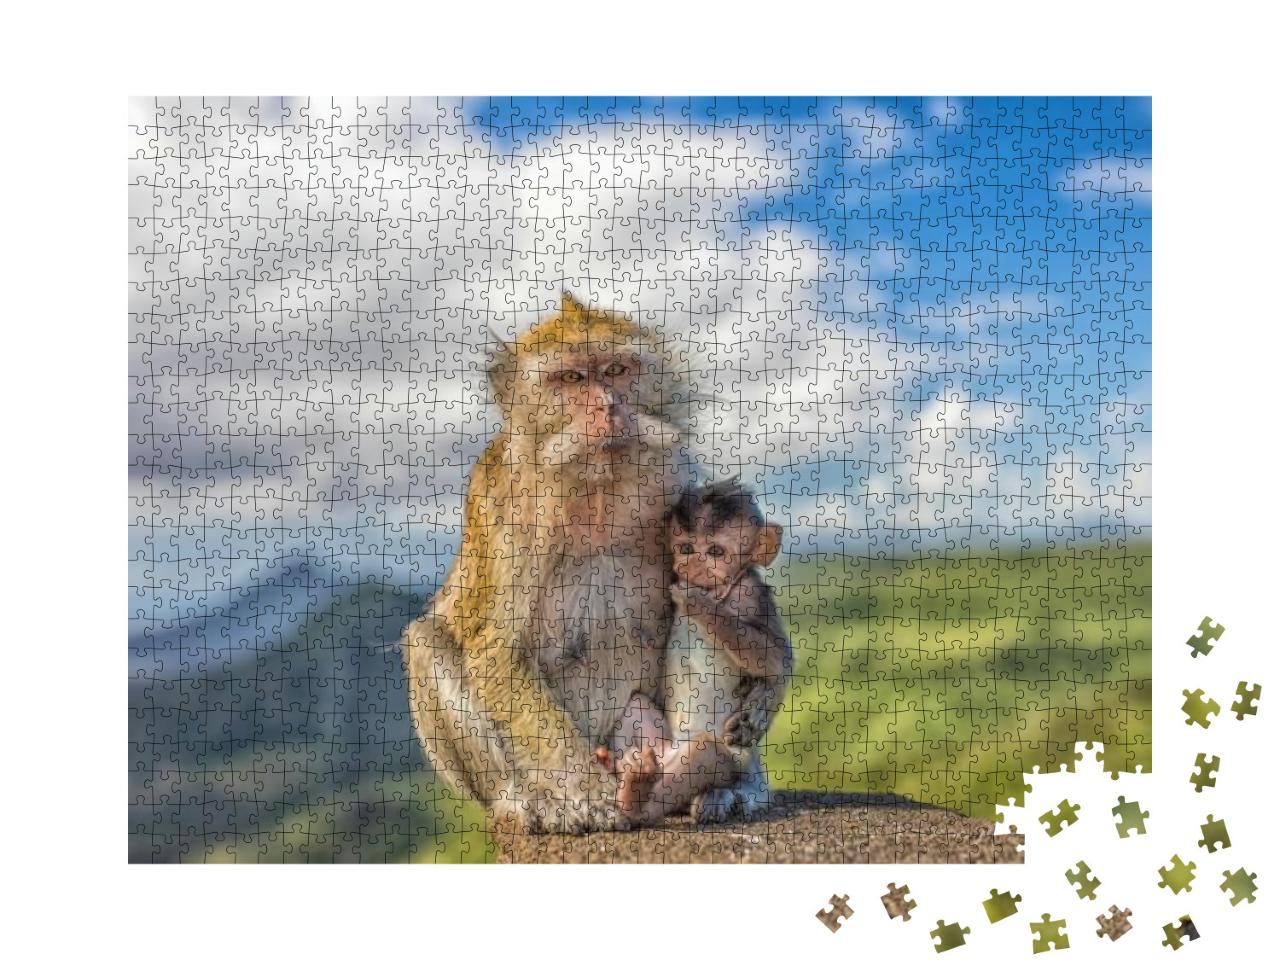 Cute Macaque Monkey with Mother Monkey in Front of Panora... Jigsaw Puzzle with 1000 pieces